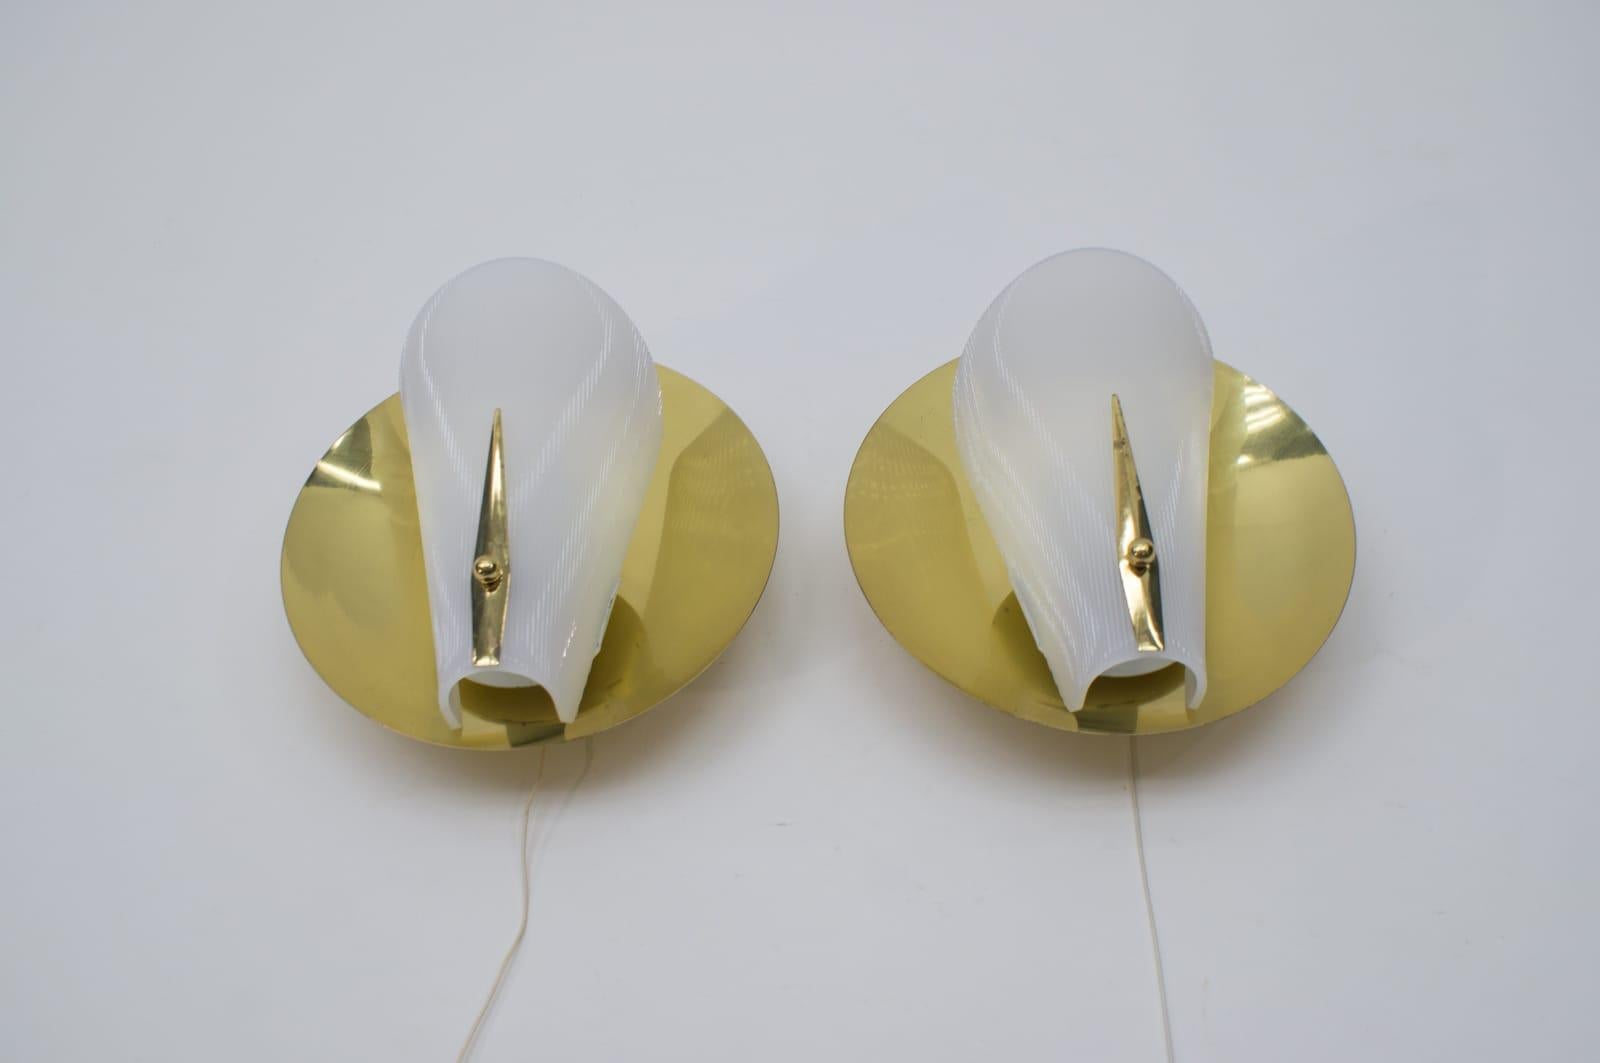 Set of Two Mid-Century Modern Brass Wall Lamps or Sconces, 1950s For Sale 2